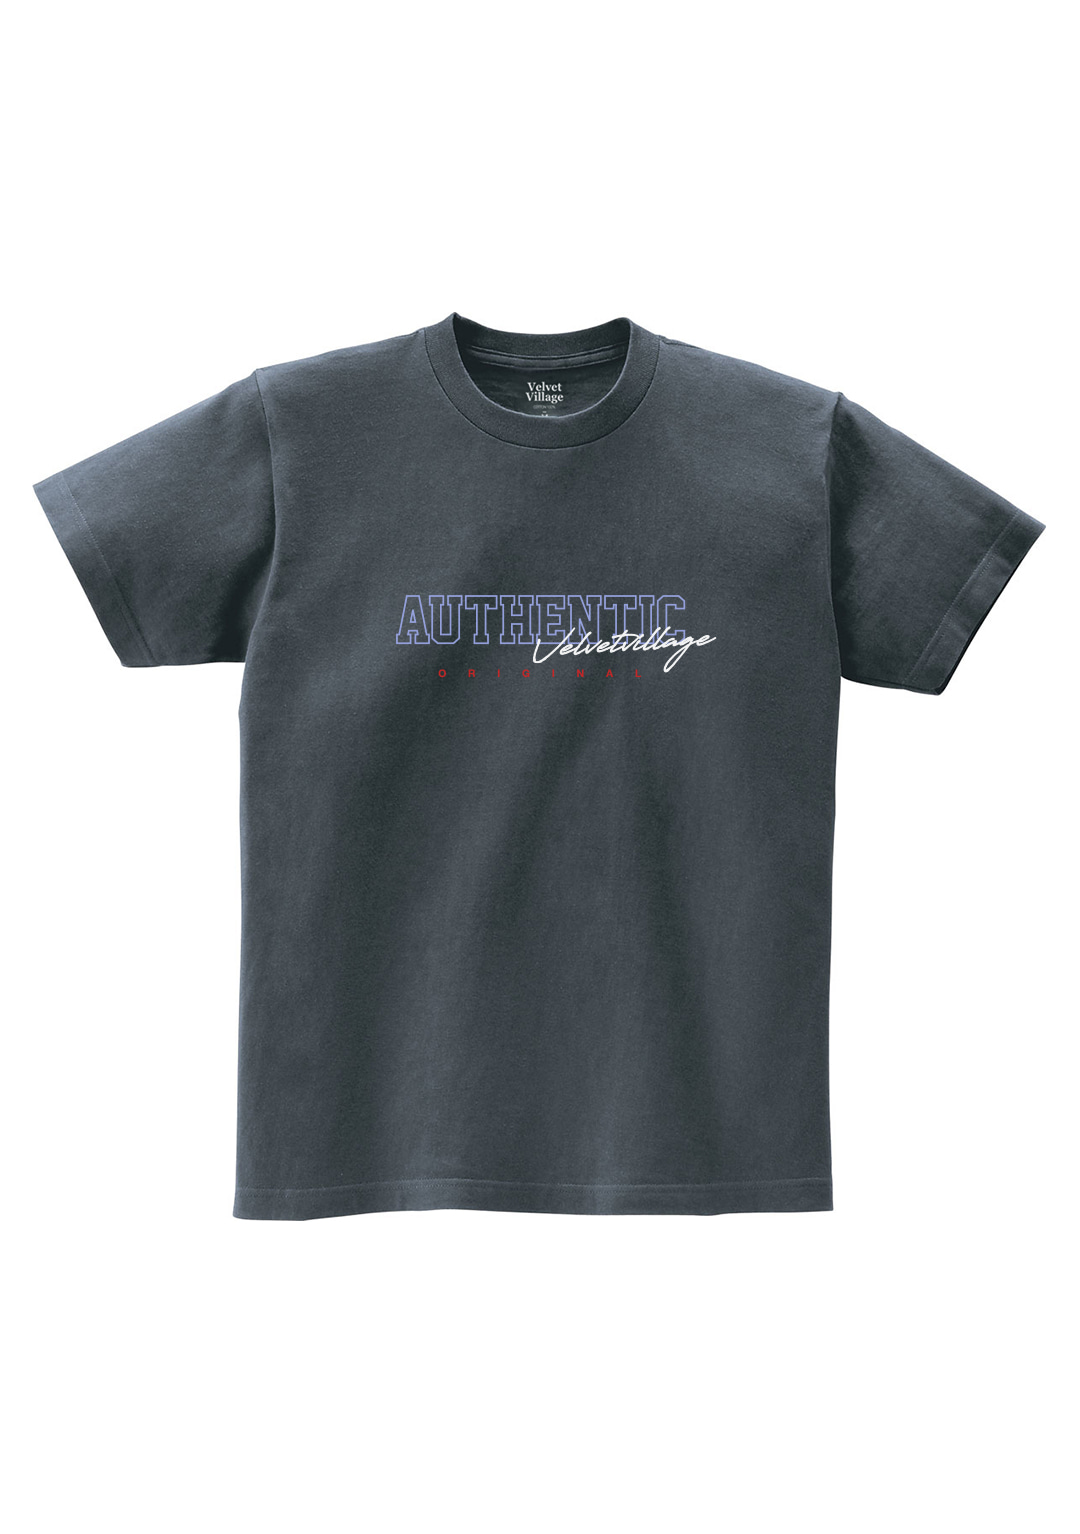 Authentic T-shirts (Charcoal)